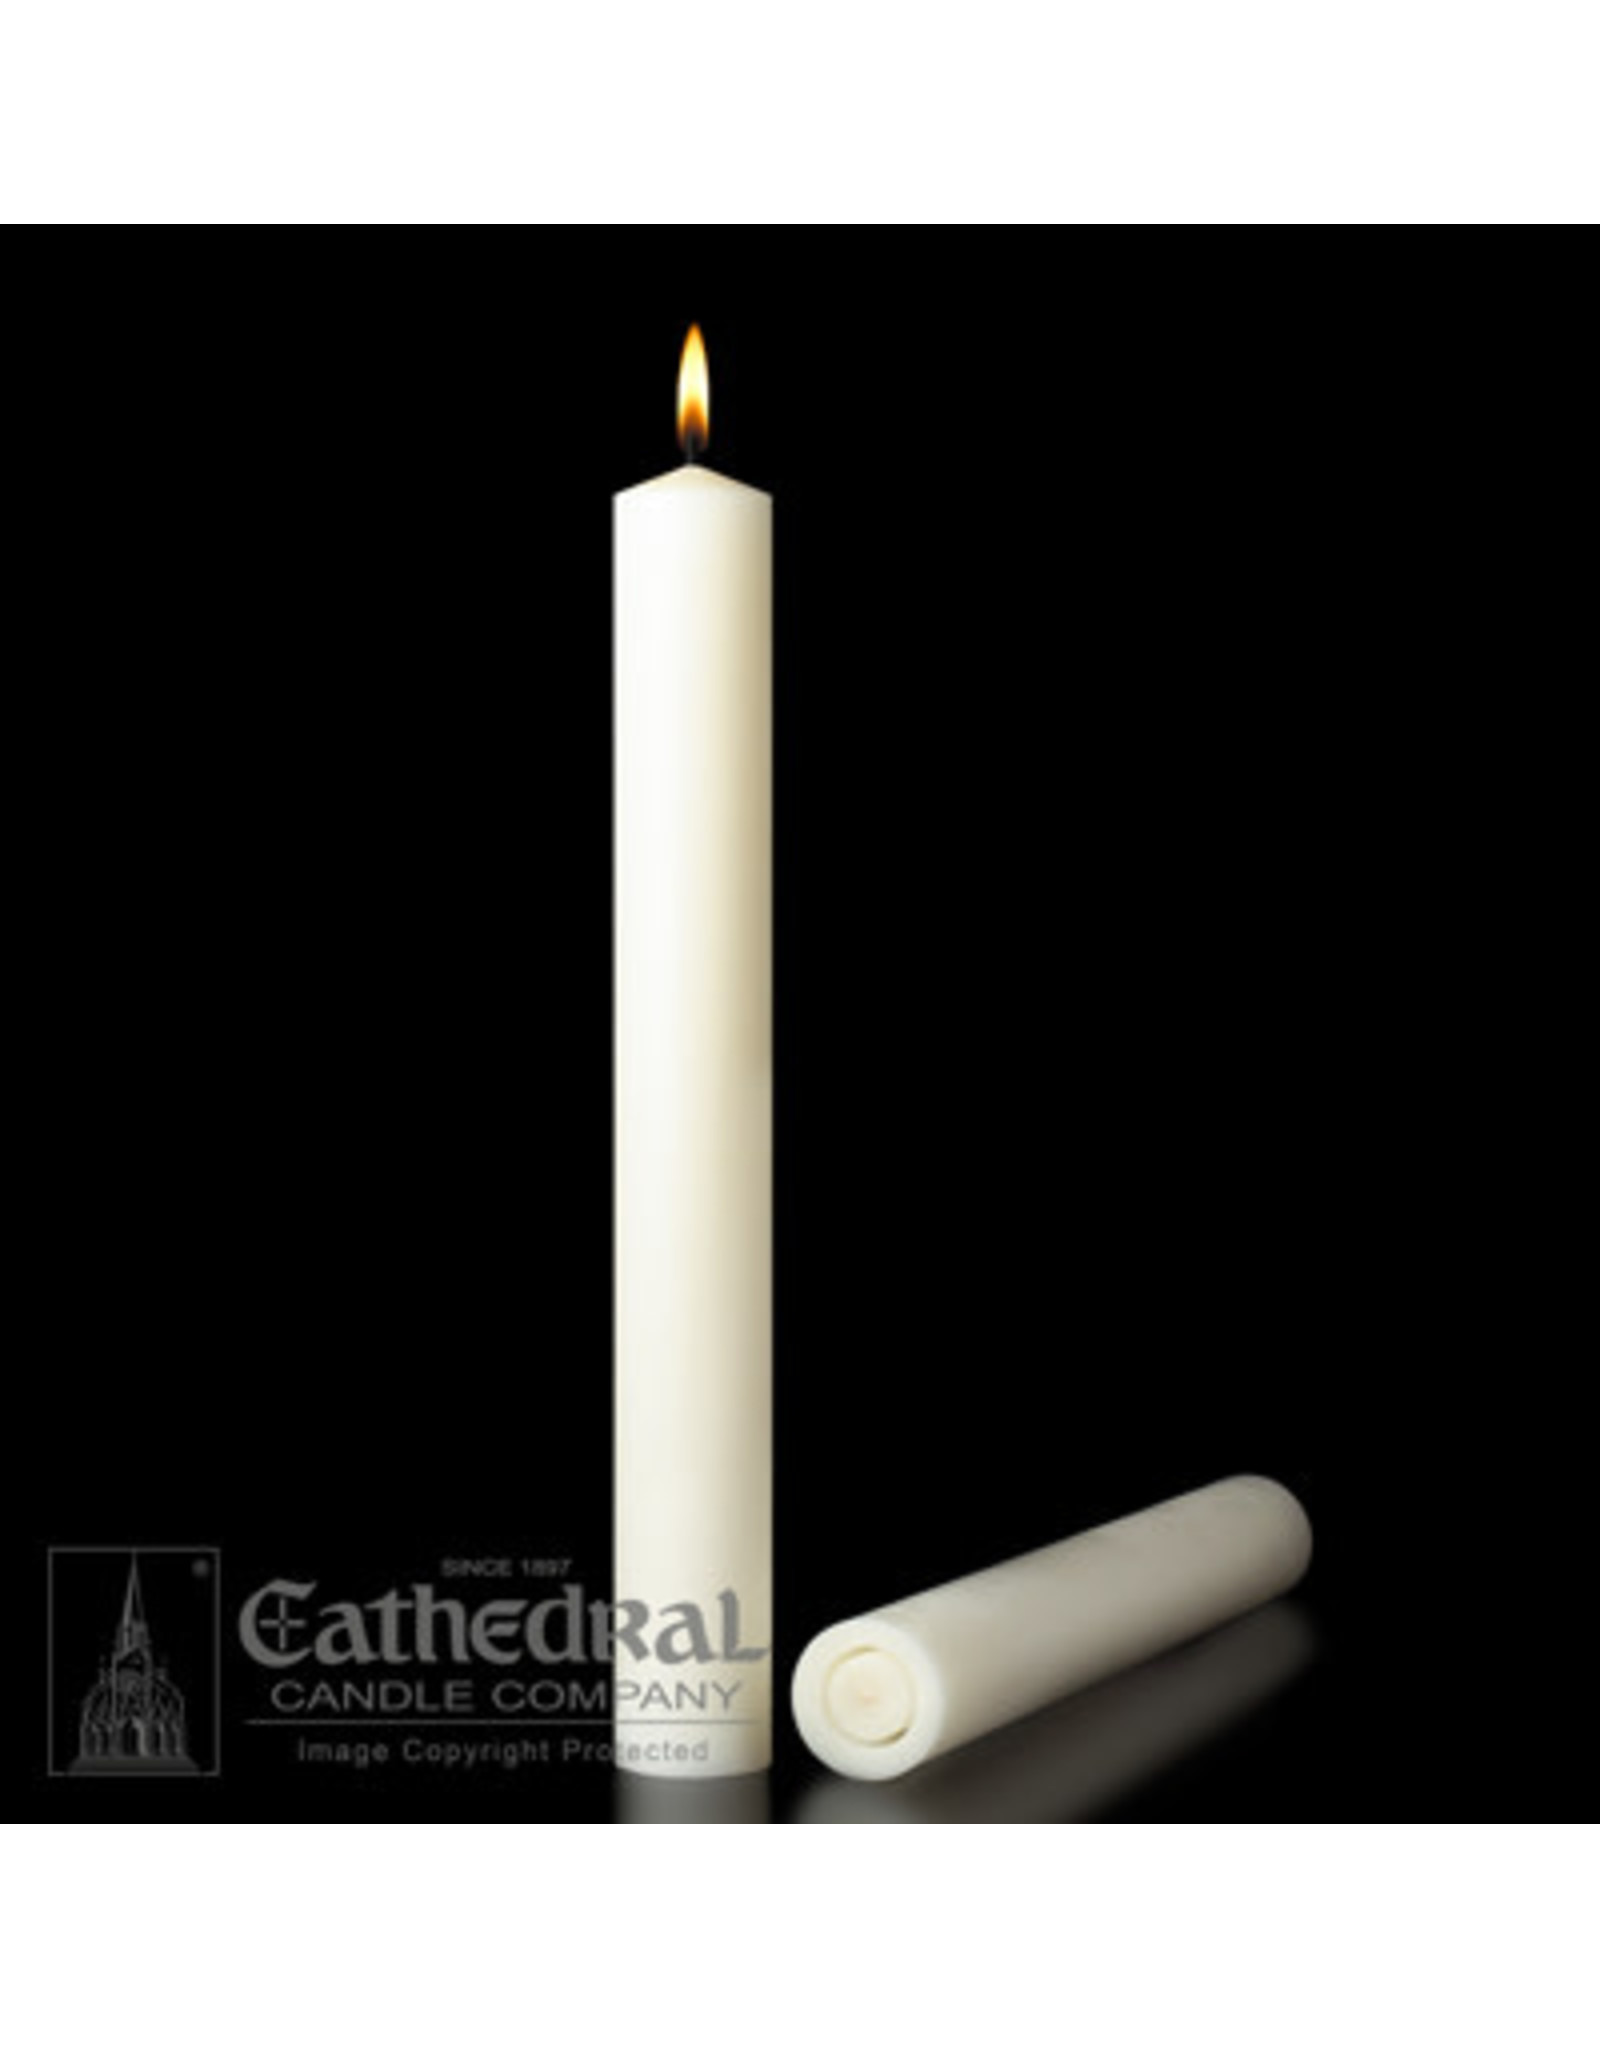 Cathedral Candle 51% Beeswax Altar Candles 1.75"x12" APE (12)